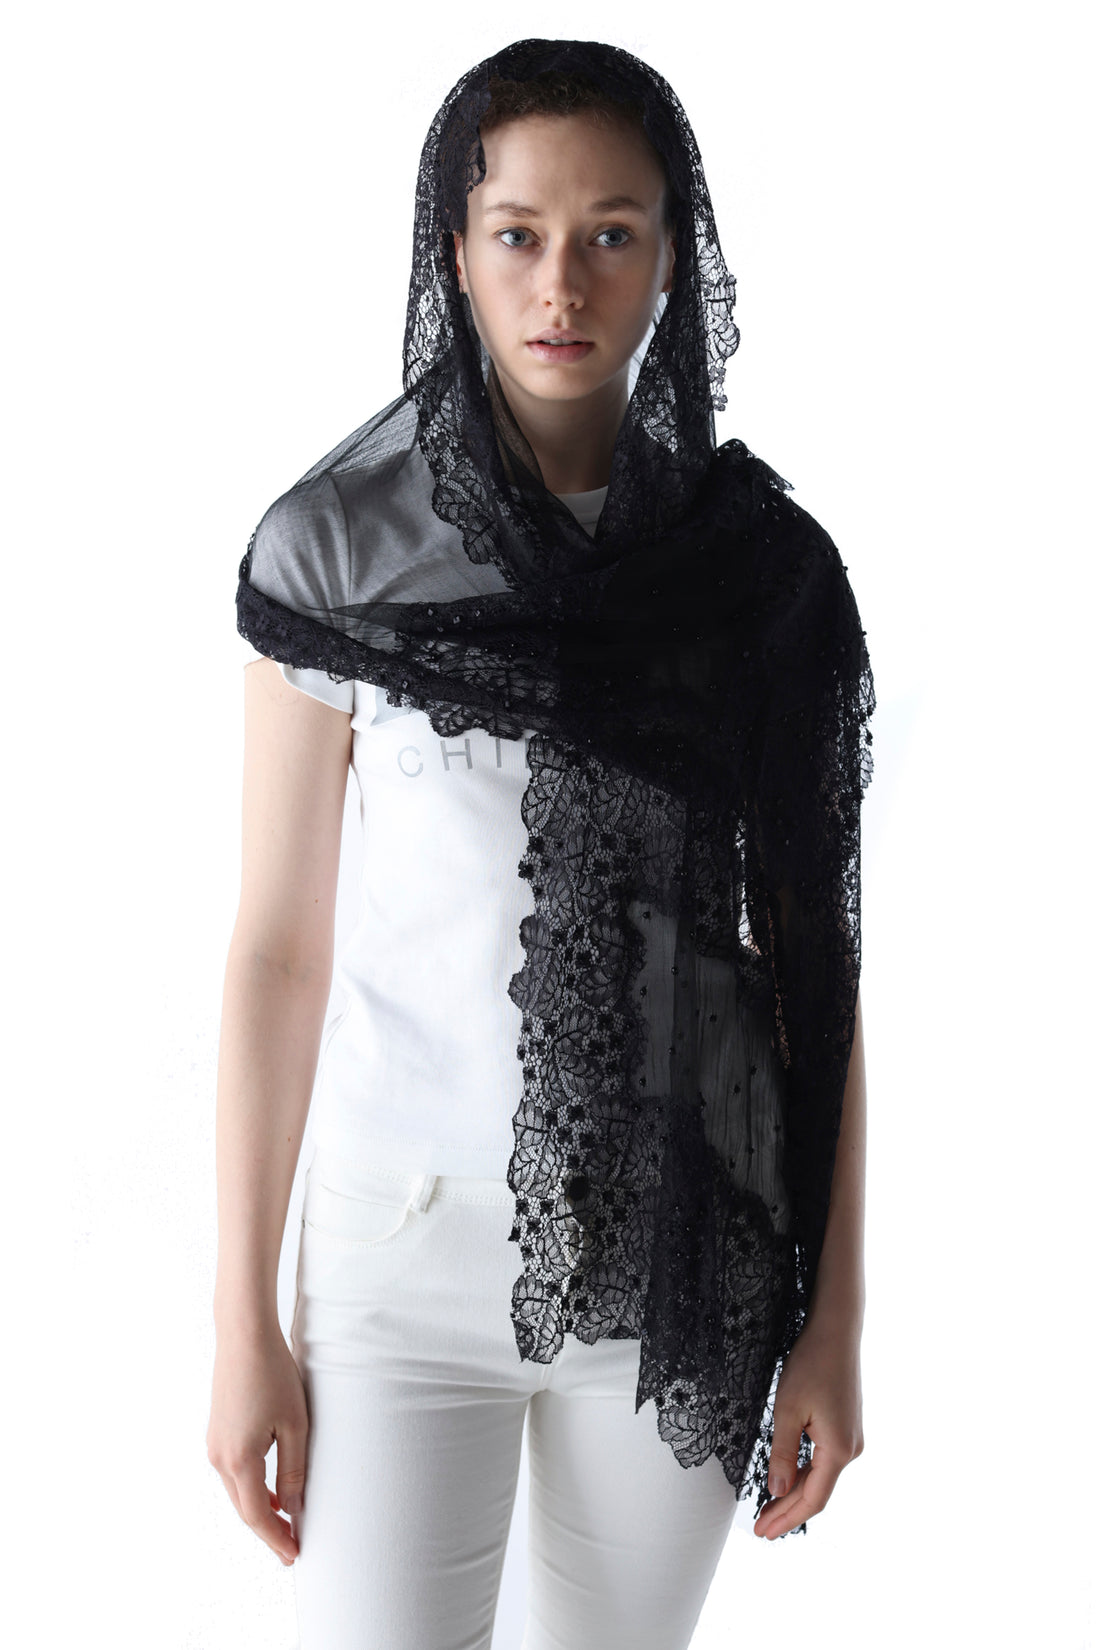 CHIE IMAI Scarf Collection - Midnight Breeze